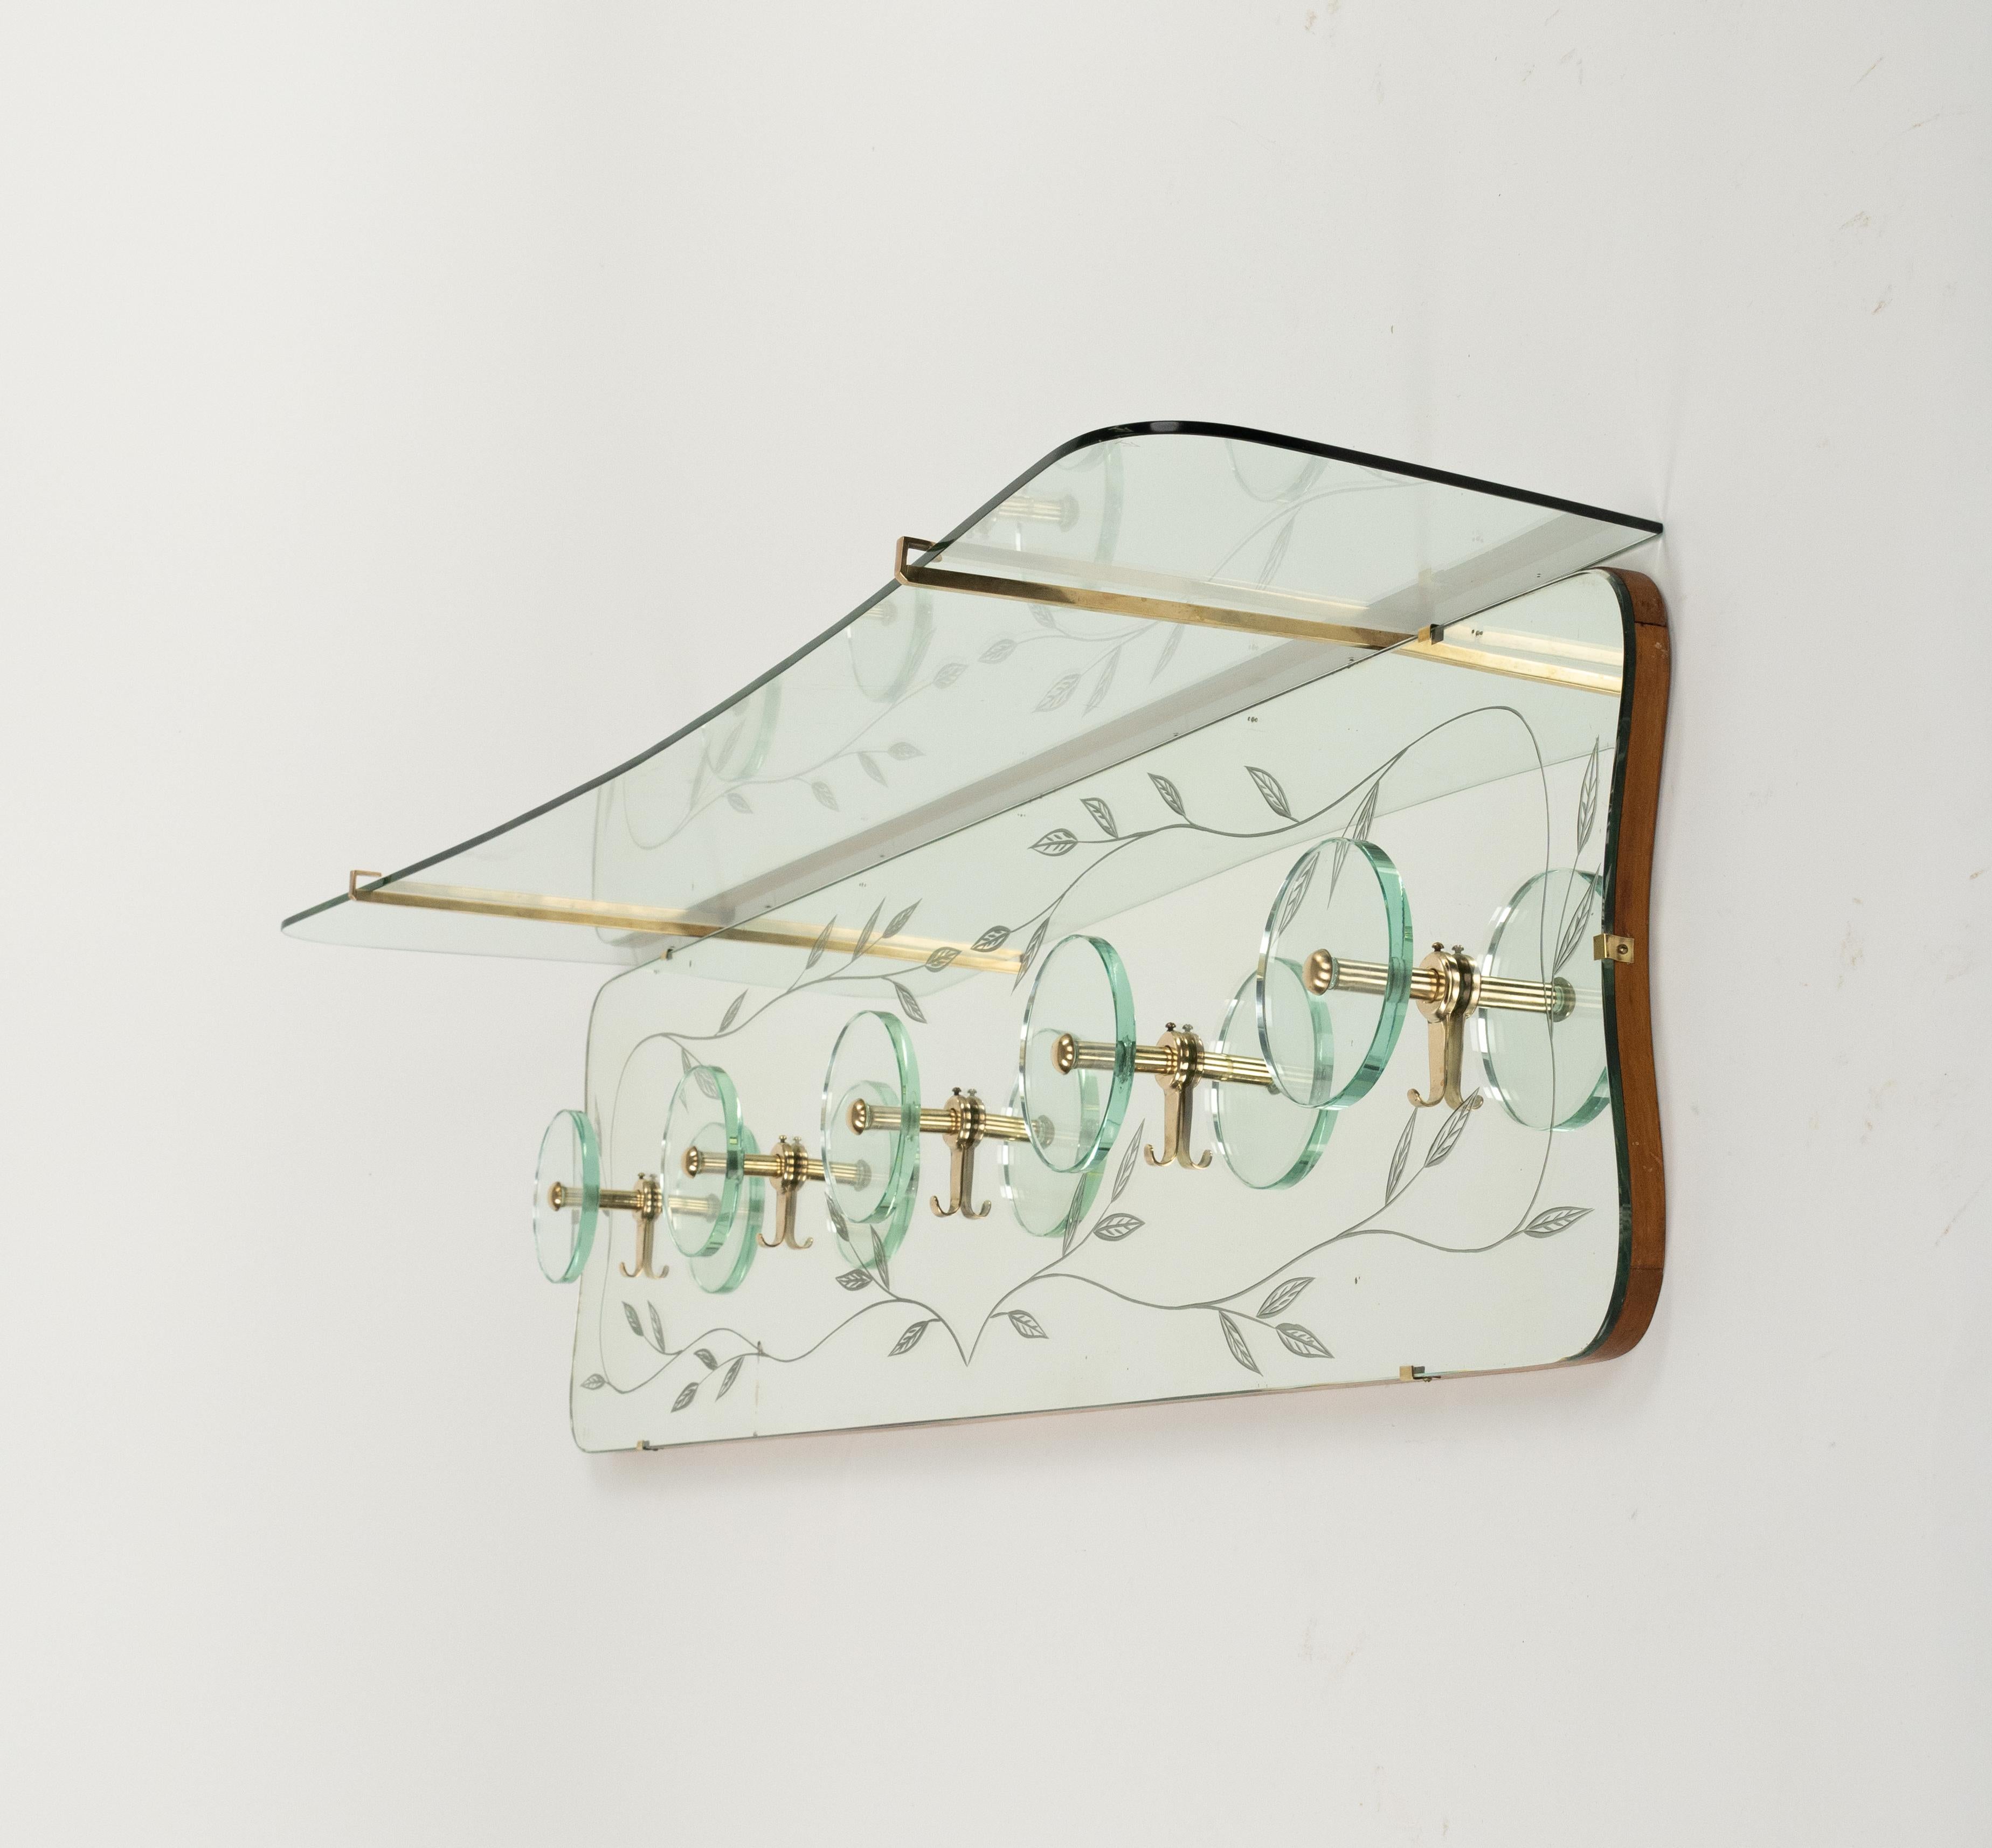 Midcentury Coat Rack Shelf in Mirror, Brass & Glass by Cristal Art, Italy, 1950s For Sale 6